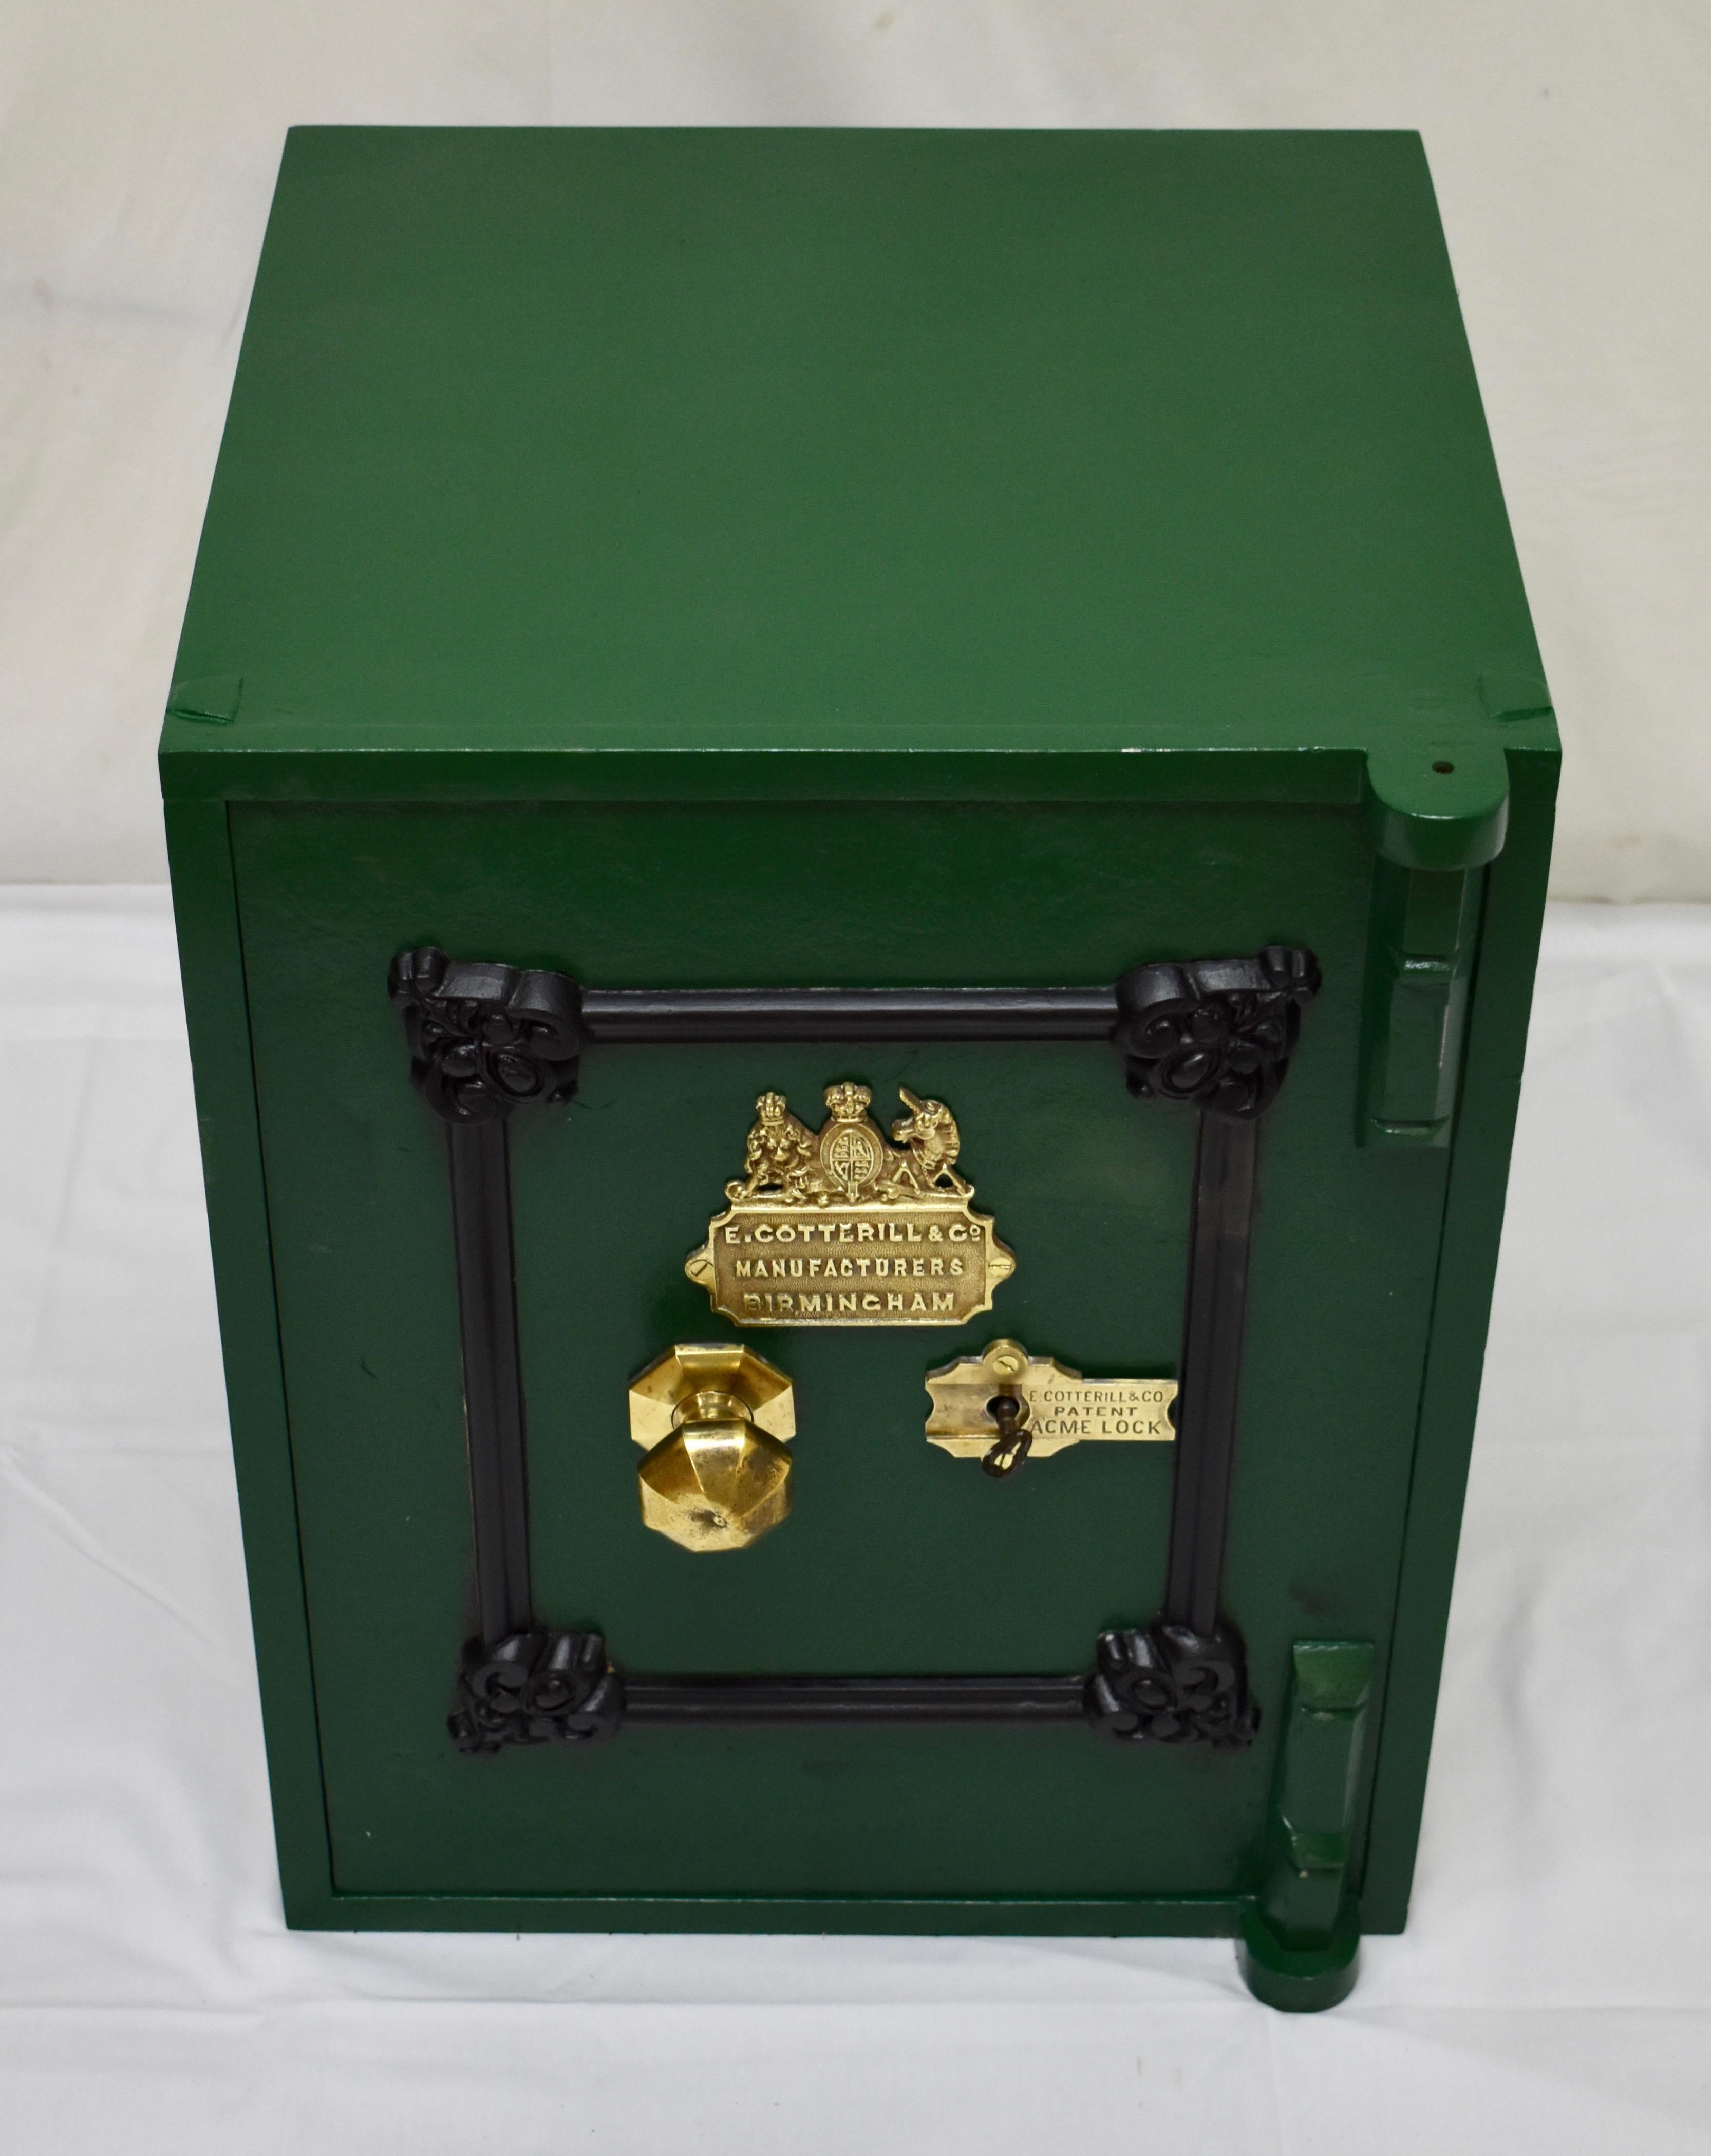 Edwin Cotterill founded his company, E. Cotterill & Co., in Birmingham, England, in 1840. This delightful little floor safe was made circa 1870. A faux panel on the door contains the large octagonal handle; the name plate, “E. Cotterill & Co.